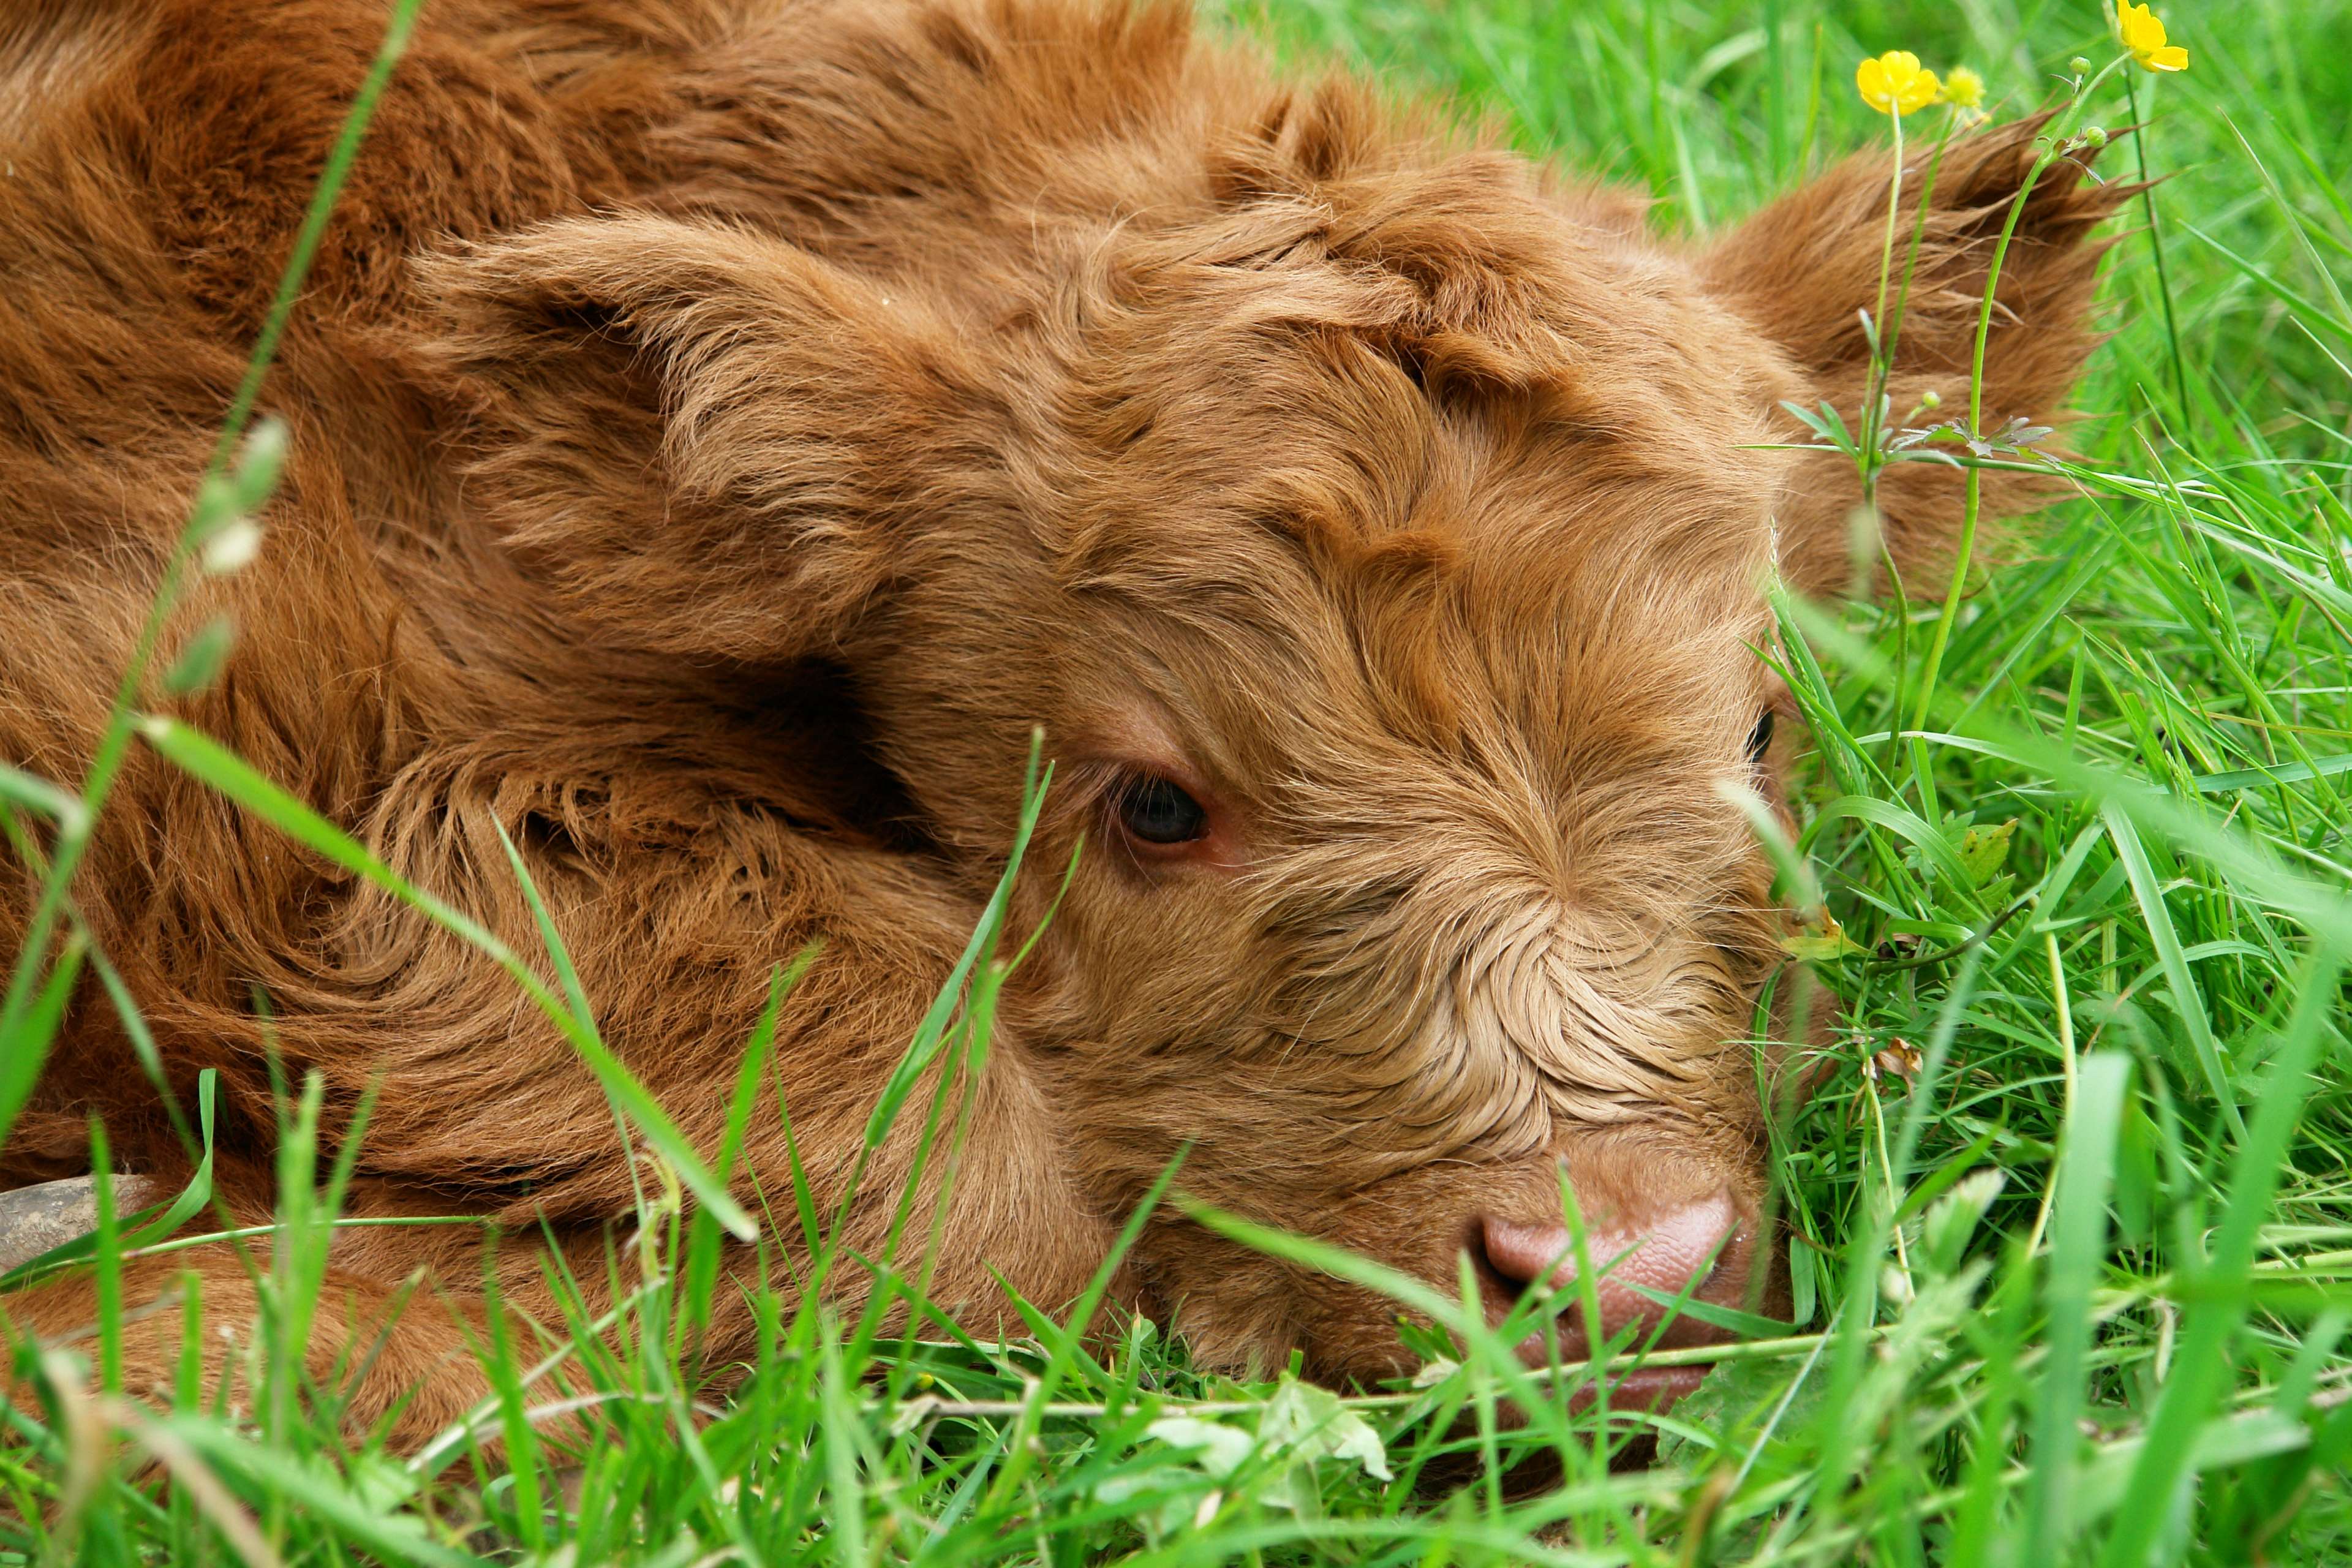 are highland cows used for meat